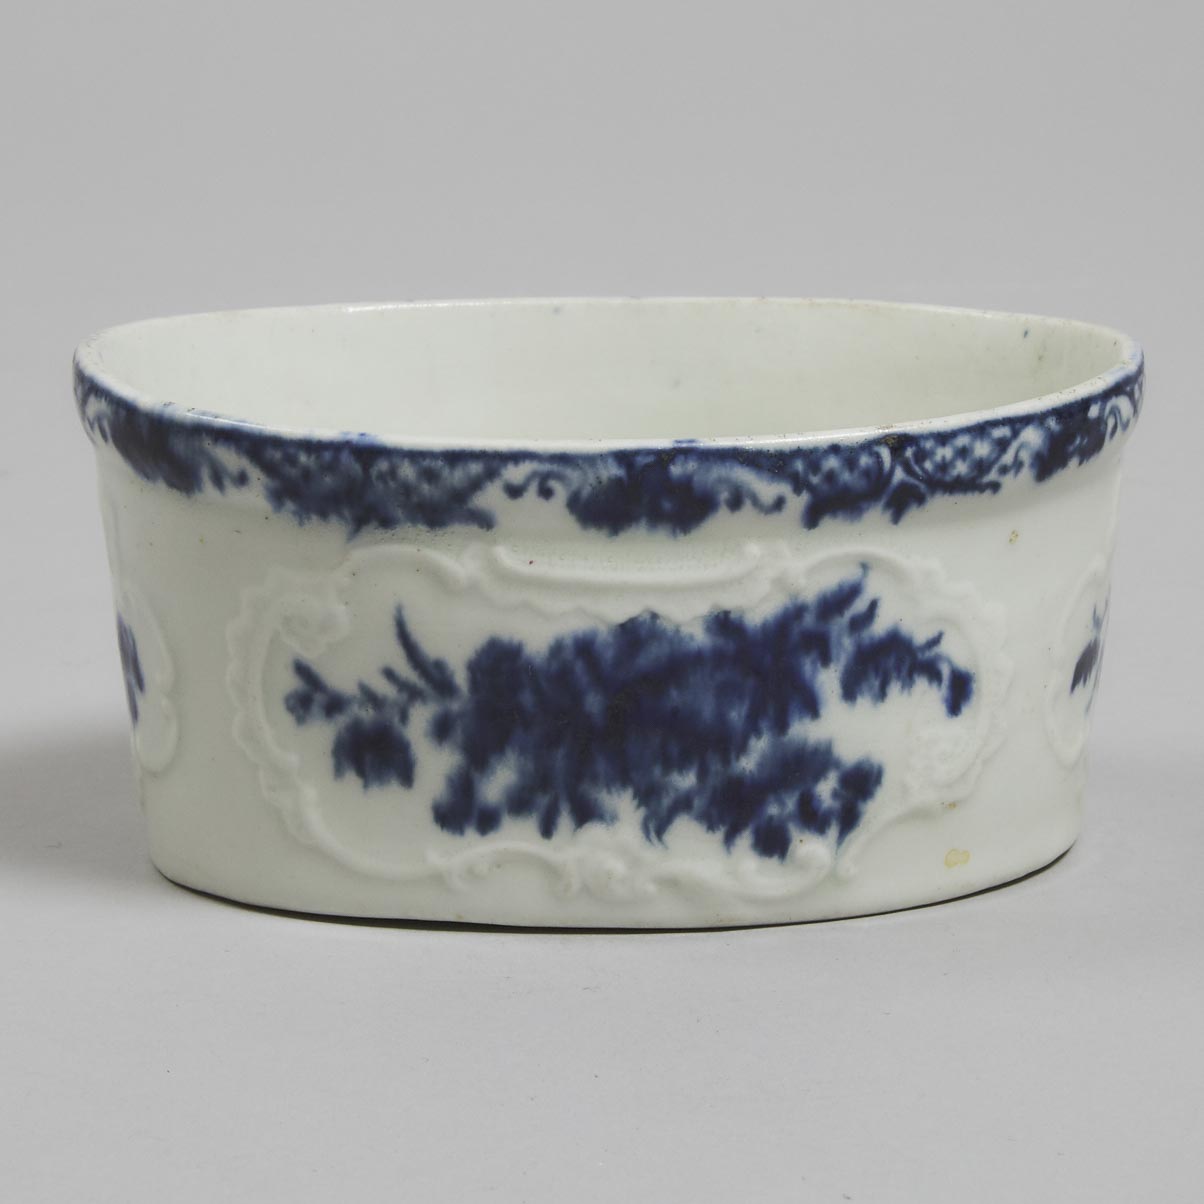 Worcester Moulded and Blue Painted Oval Potting Pot, c.1765-70